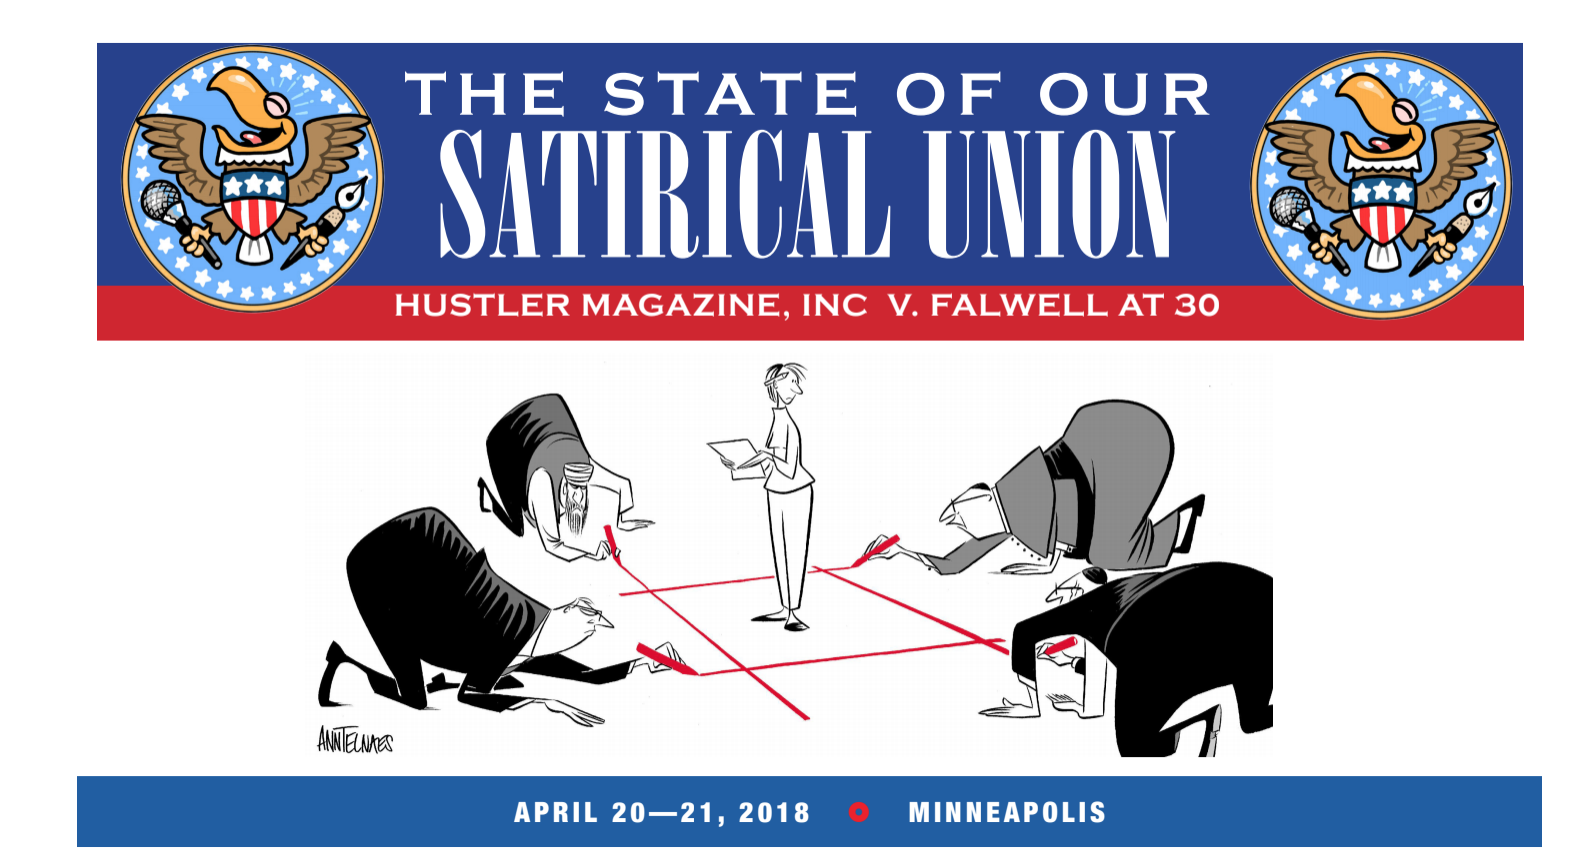 The State of Satirical Union